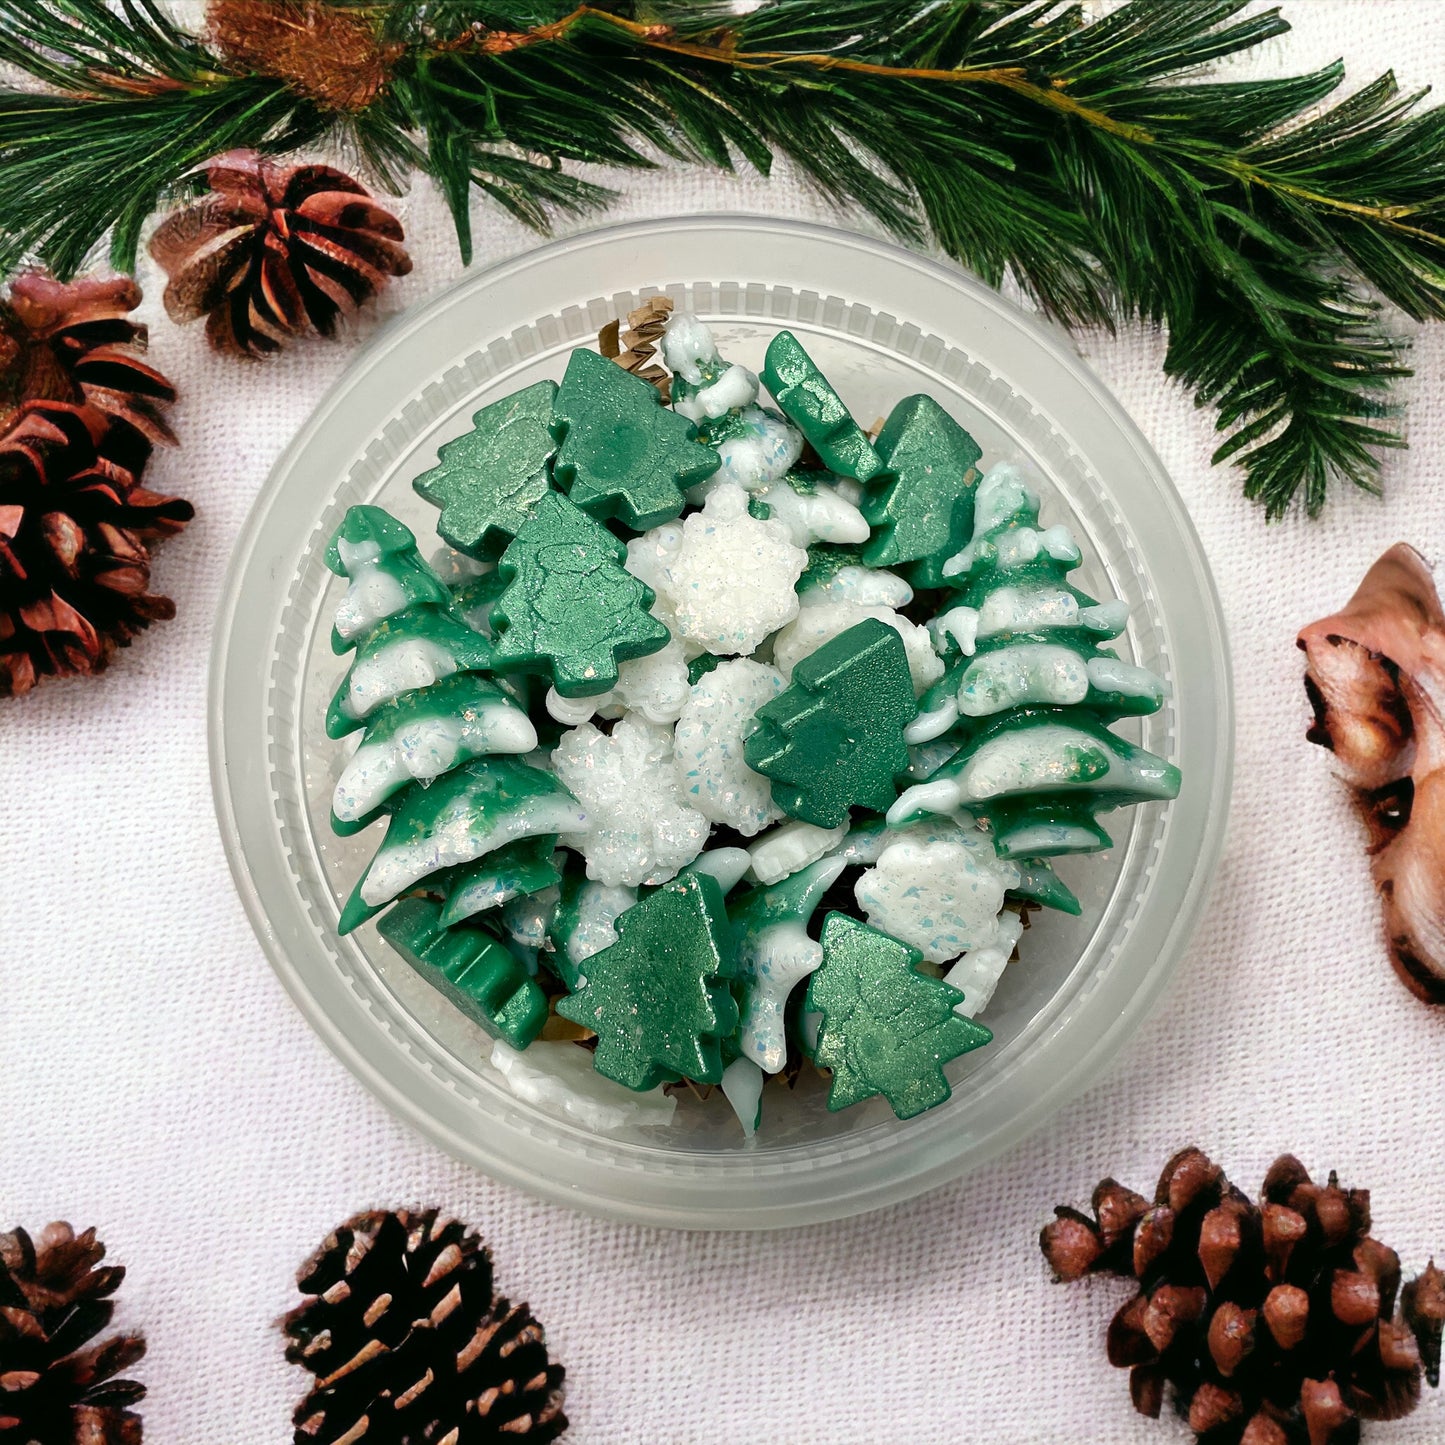 Christmas Tree Wax Melts. 3 Ounces/Soy Wax Melts/Snowflakes/Trees/Strongly Scented Wax Melts/ Wax Tarts for Wax Warmers/Holiday Wax Melts